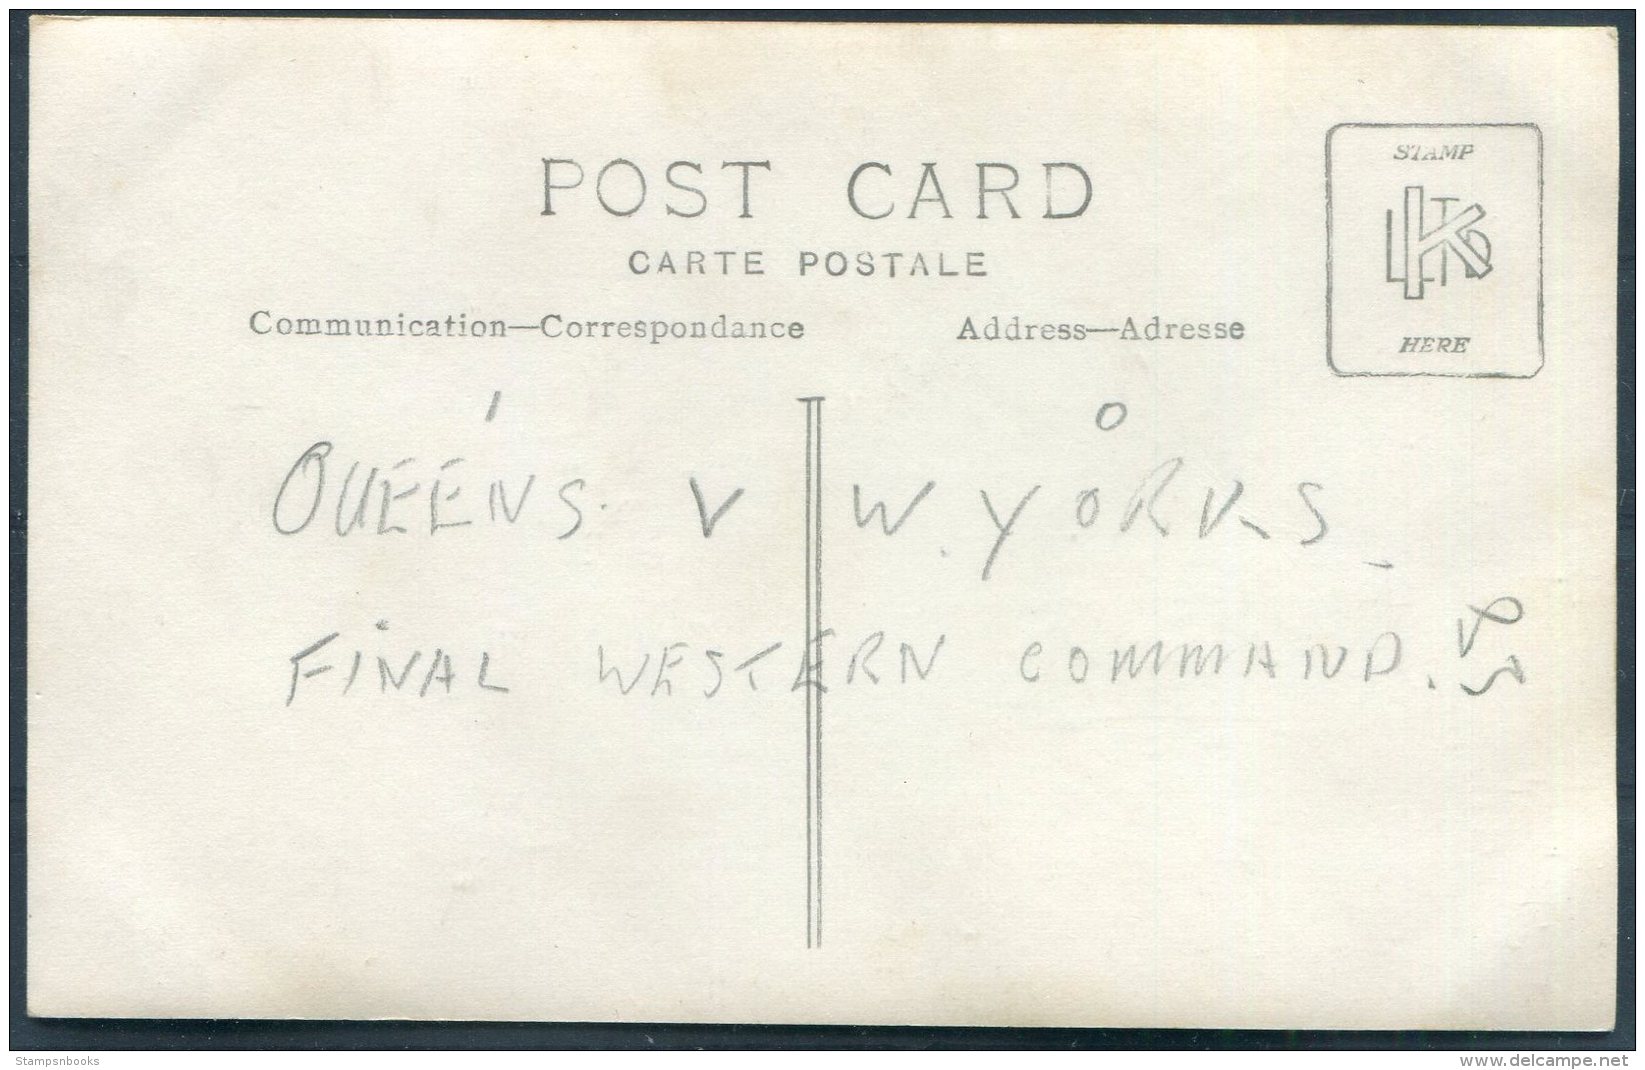 3 X British Army Western Command Football Match Queens V West Yorkshire Regiments RP Postcards - Regiments